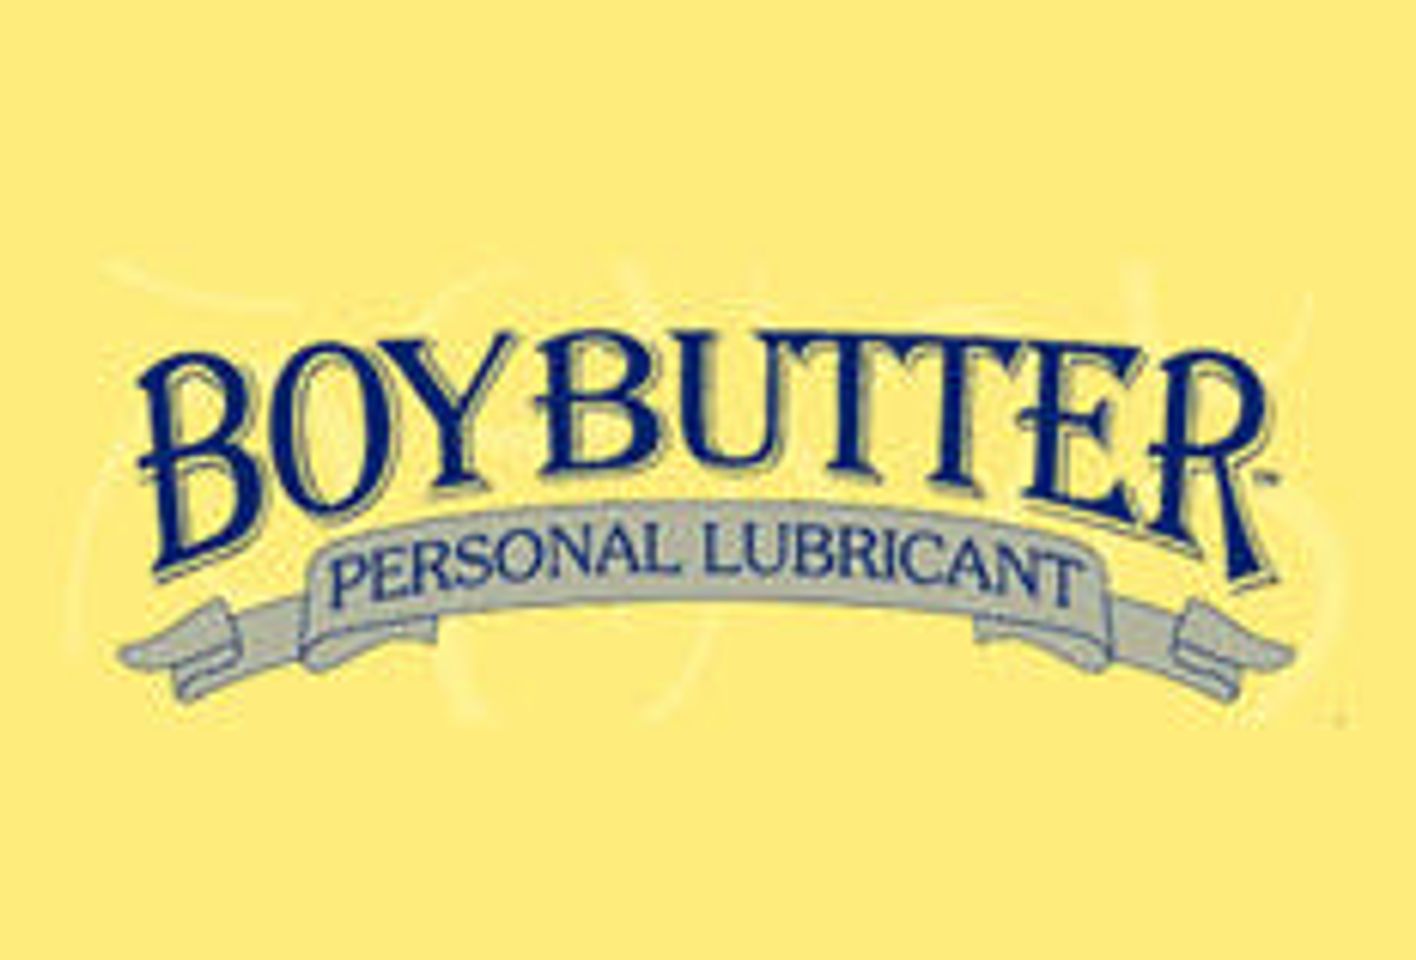 Boy Butter Ad Deemed "Too Controversial"